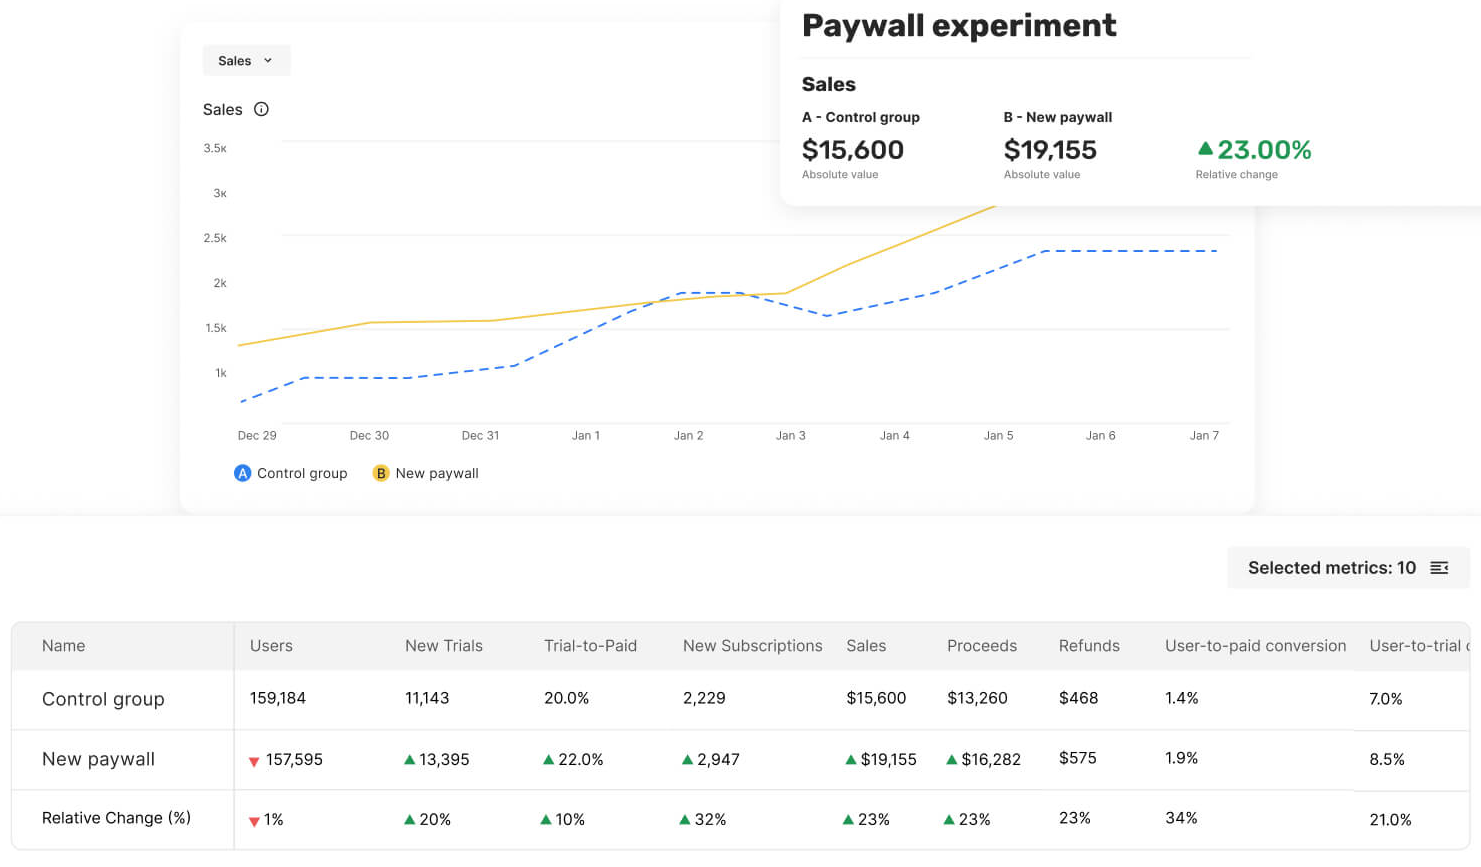 Paywall experiment measurement